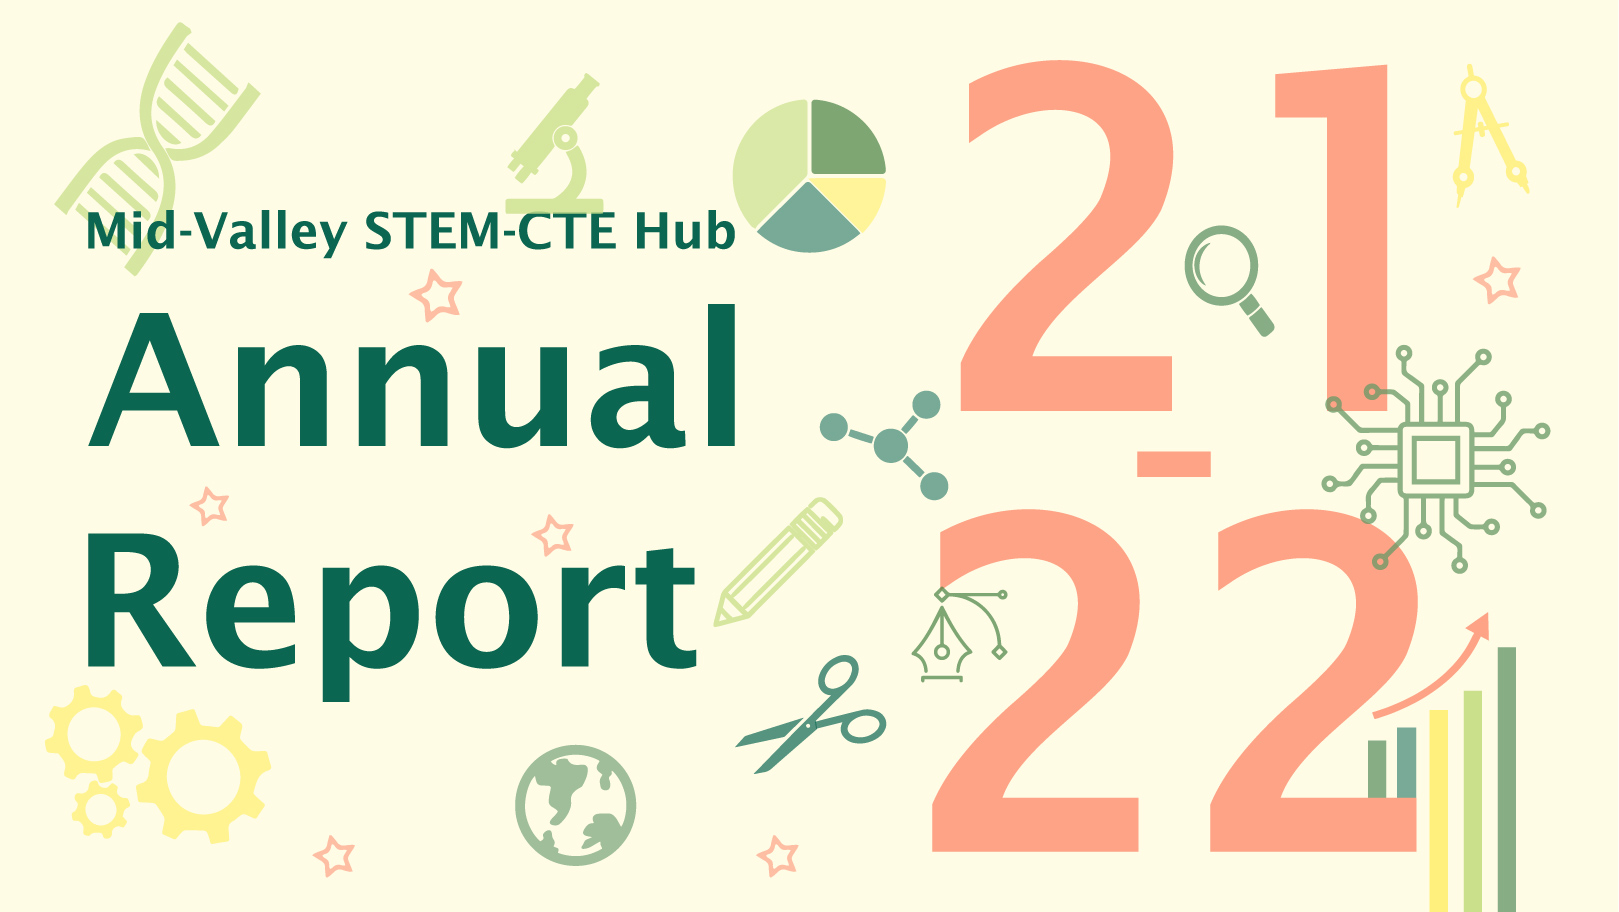 Annual Report 2021-22 flyer. Yellow background, green and pink STEM icons.